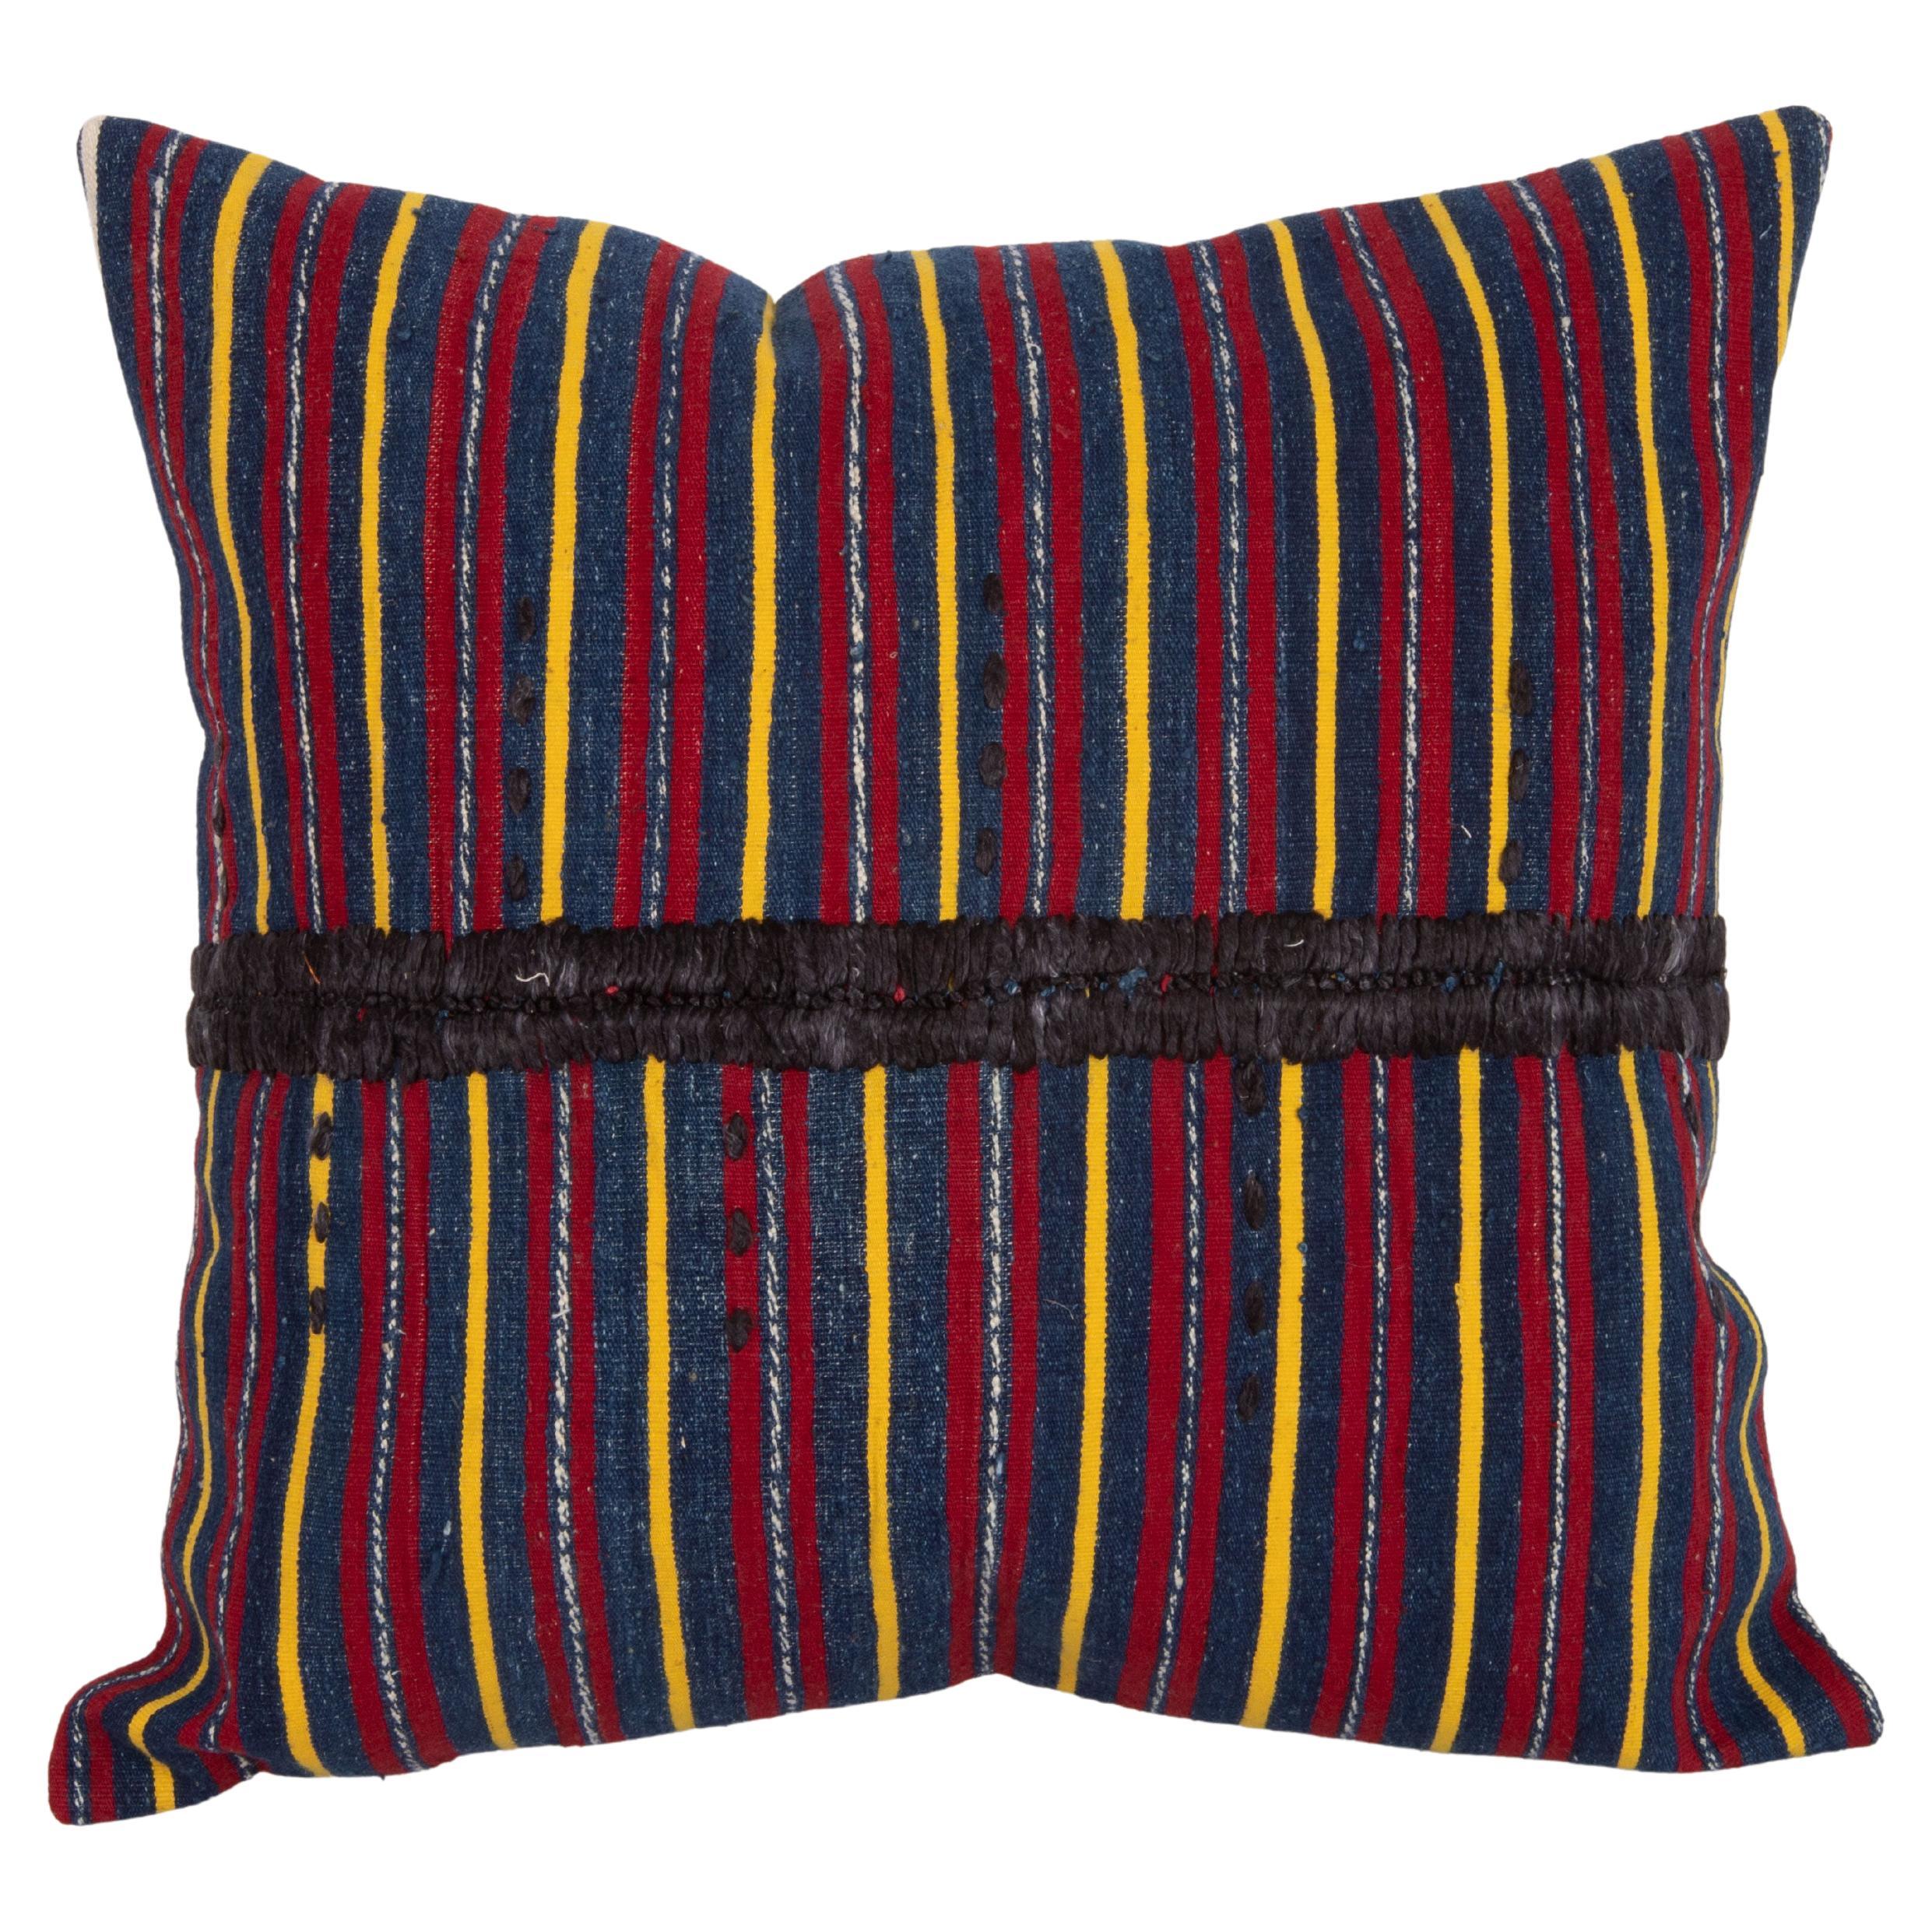 Rustic Anatolian Pillow Cover, Mid 20th C.